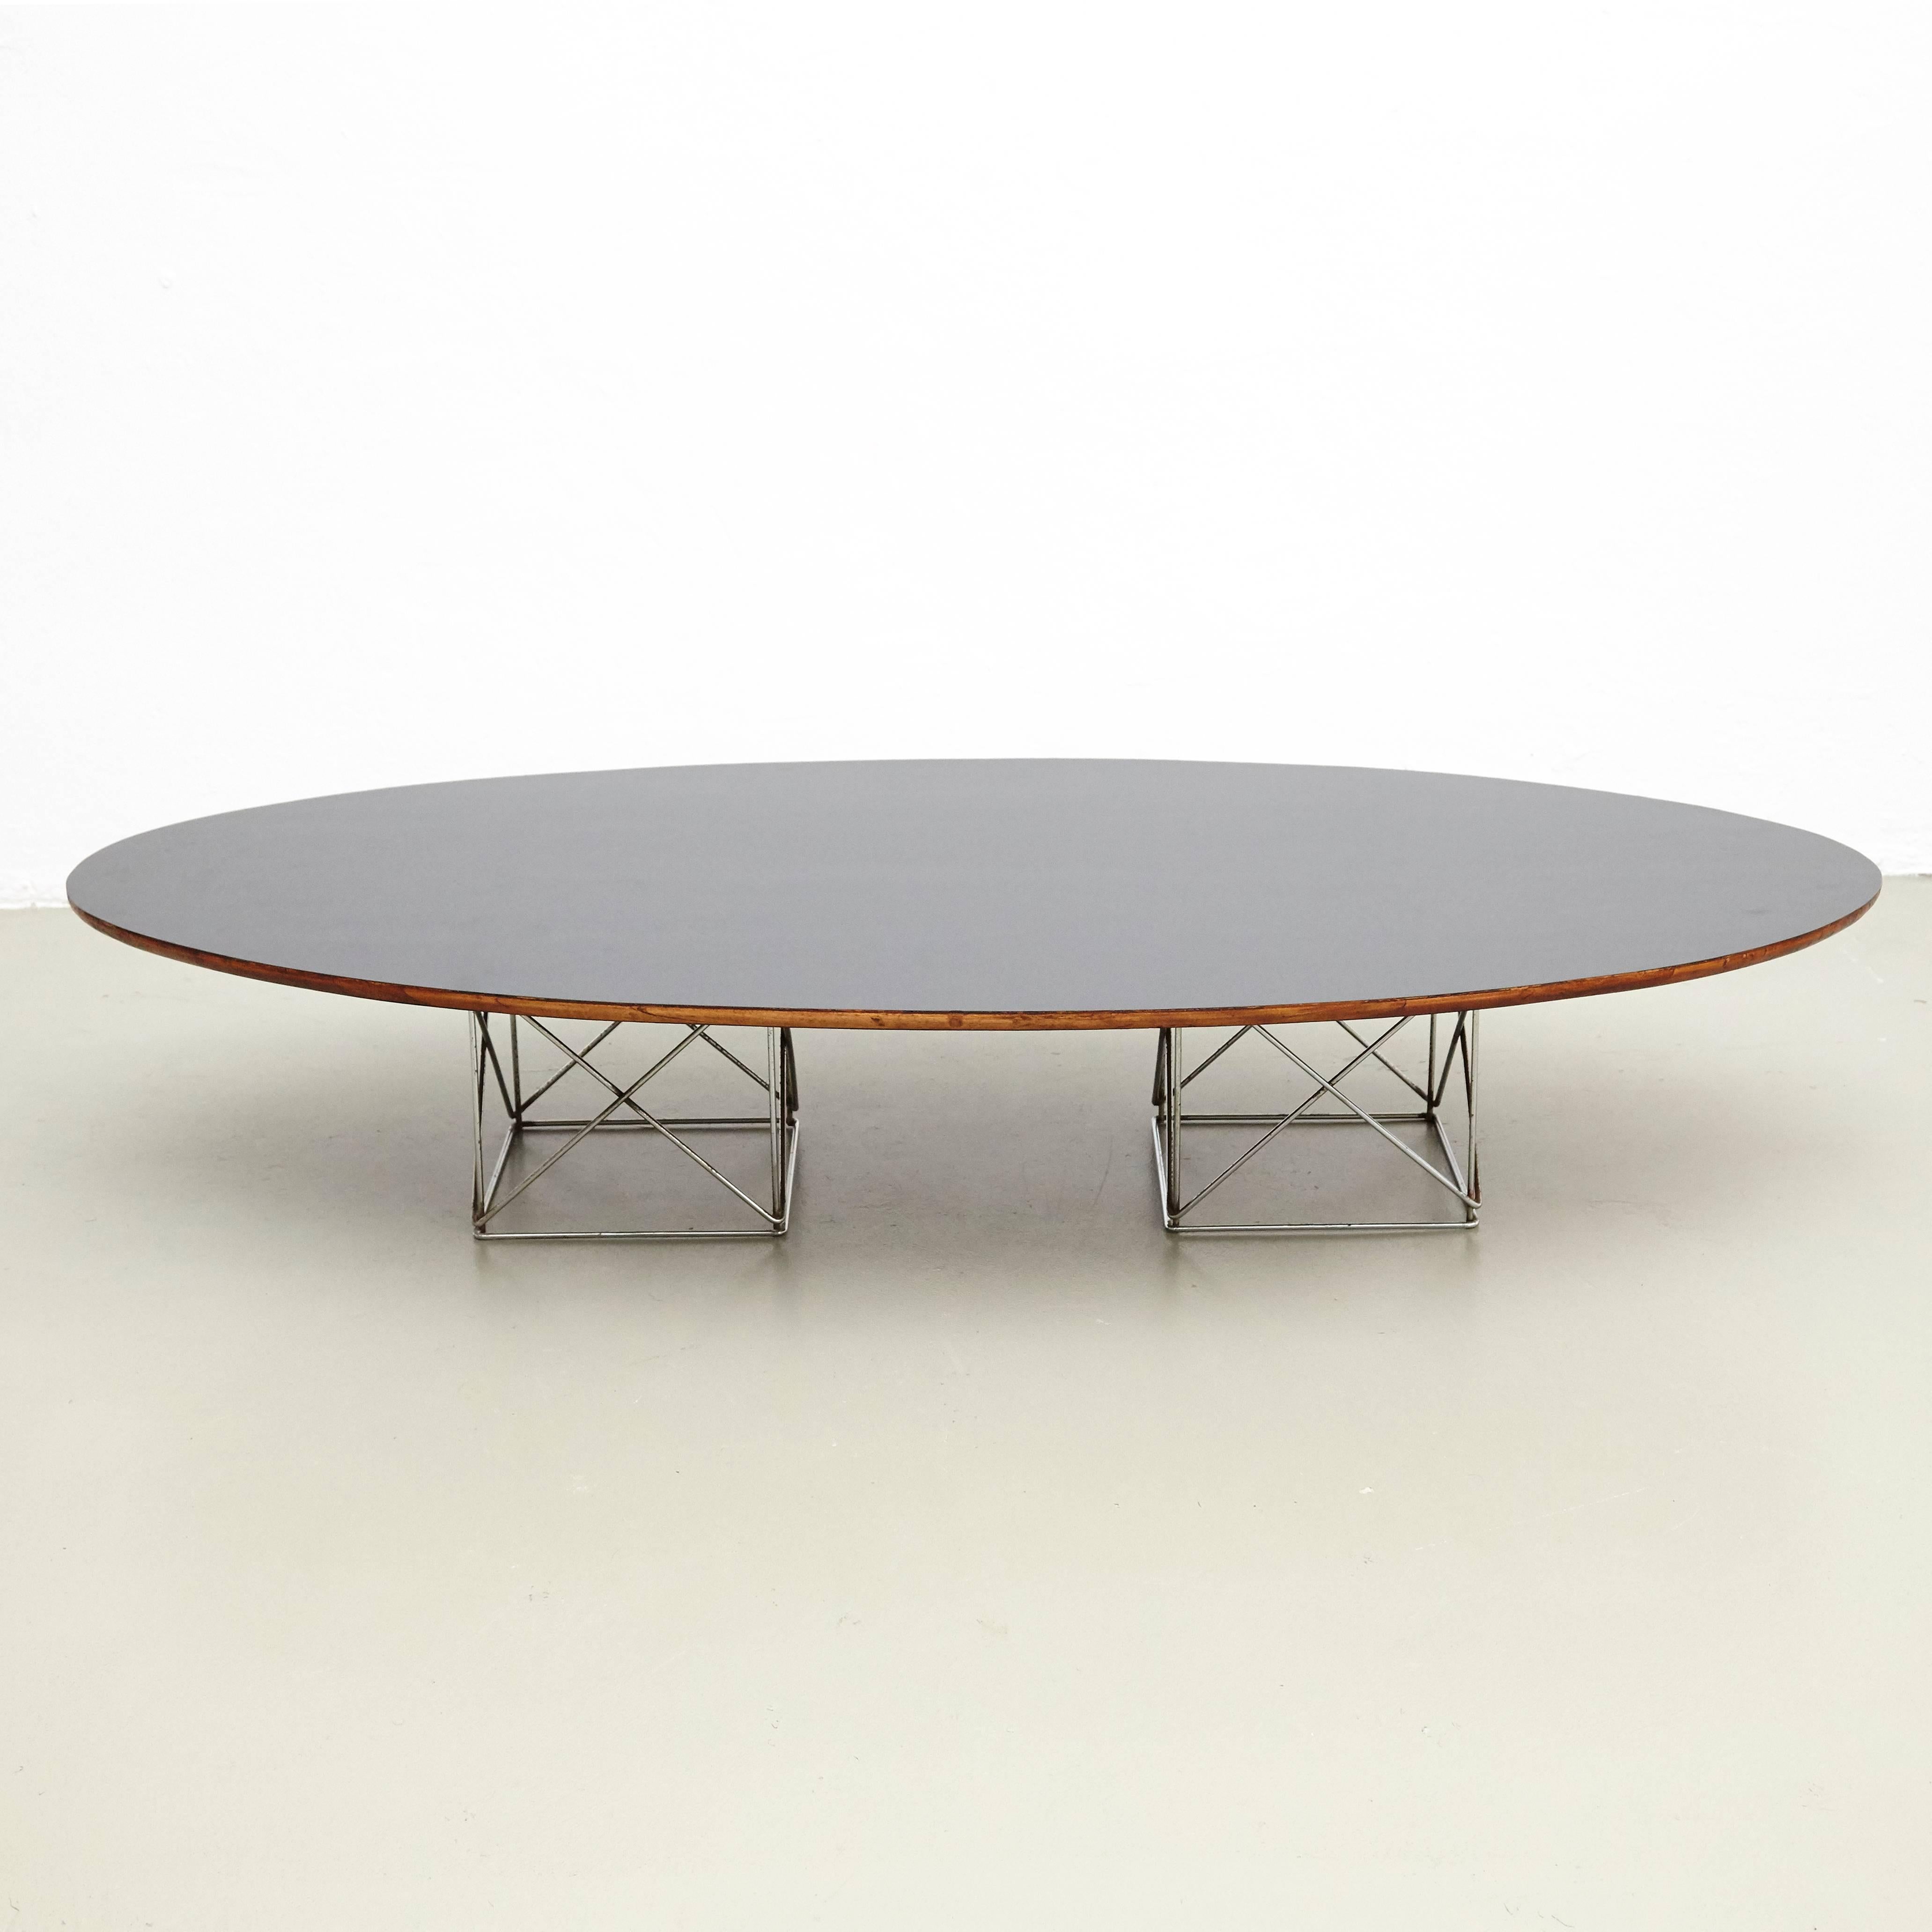 Table in the style of Charles Eames designed by unknown designer, circa 1970 in France.
Metal structure and formica tabletop.

In good original condition, with minor wear consistent with age and use, preserving a beautiful patina.
  